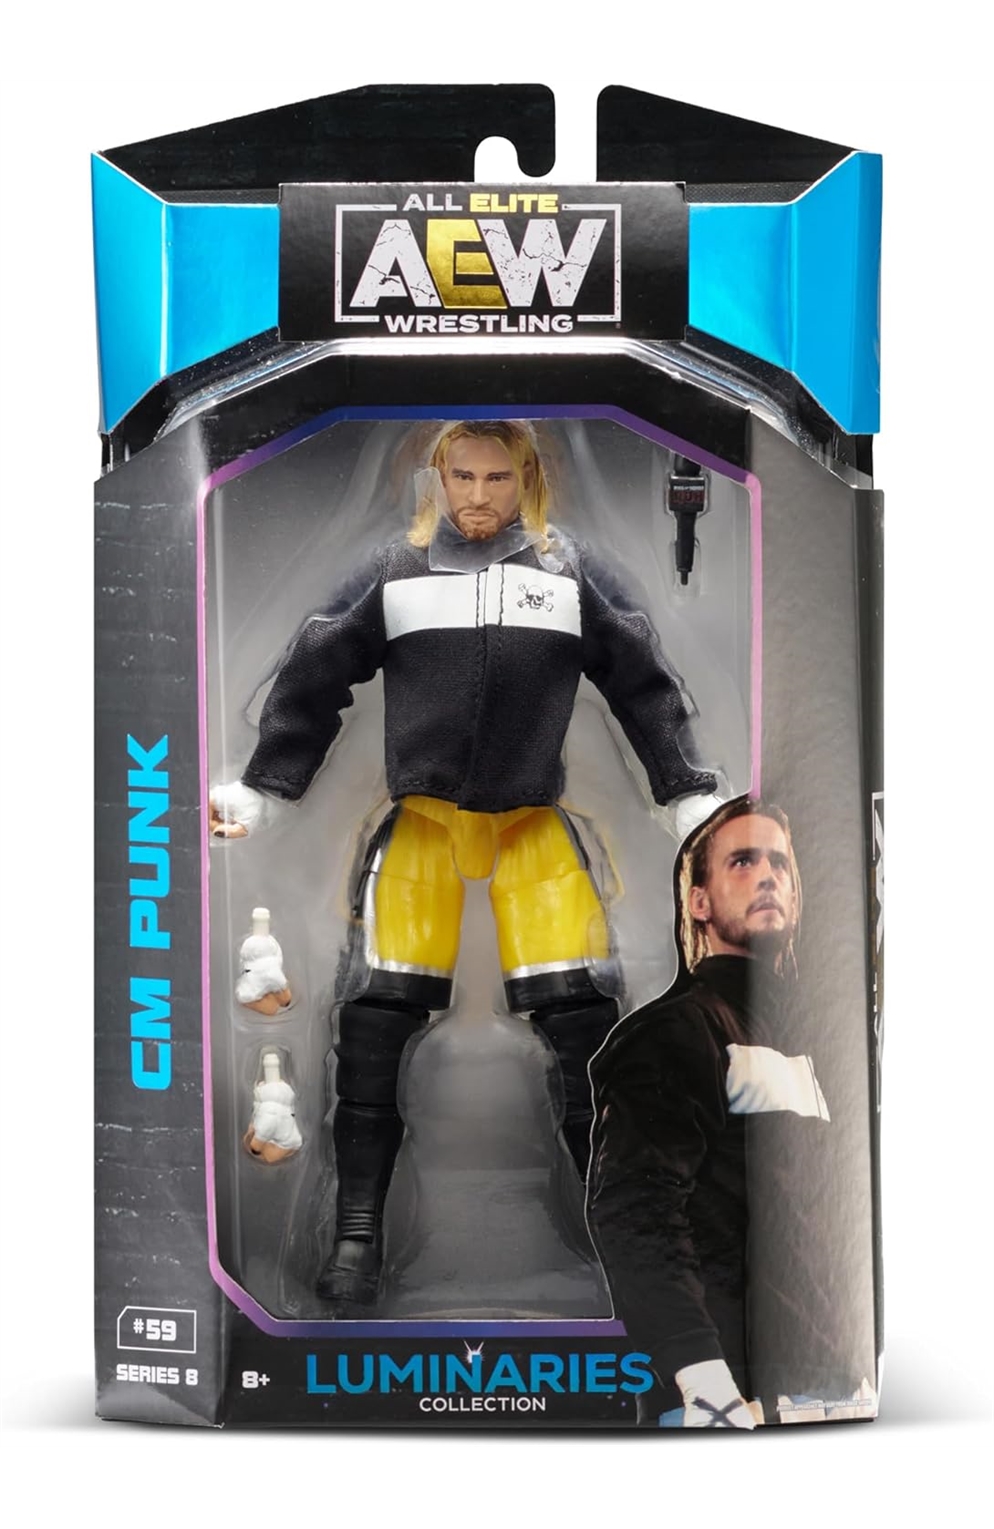 Aew Unmatched Series 8 Luminaries Cm Punk Wrestling Action Figure